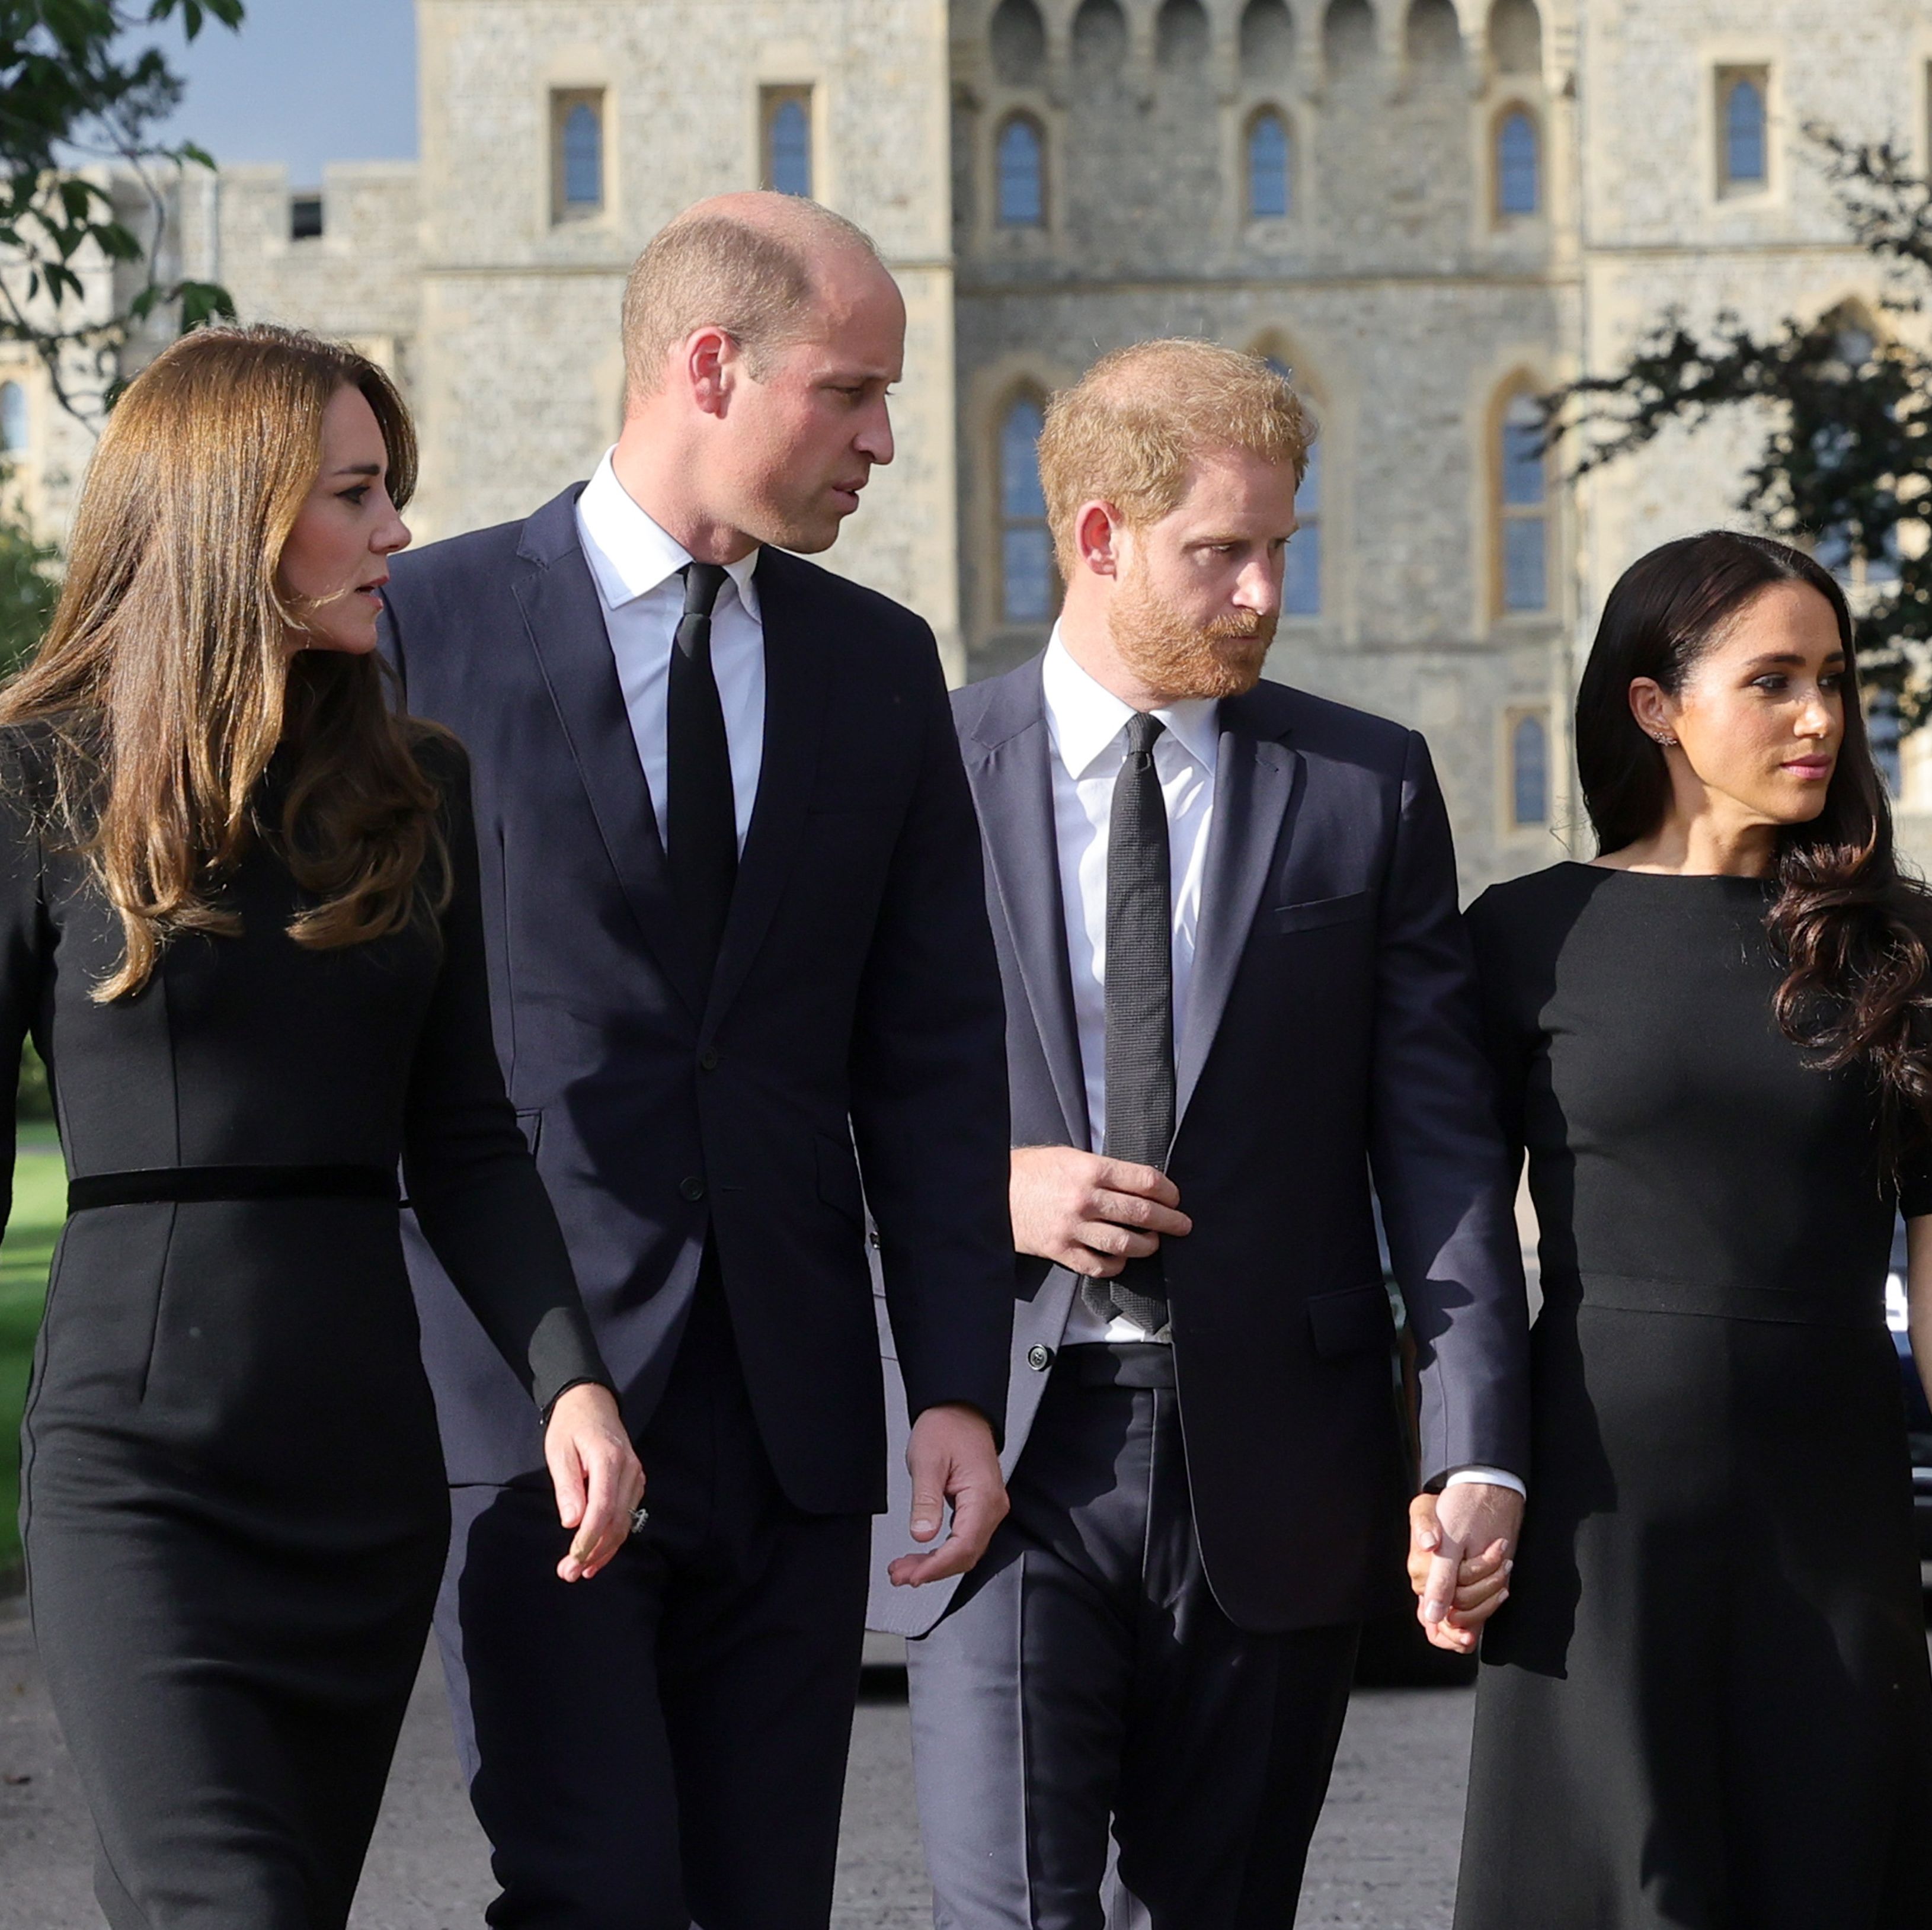 Harry and Meghan Had an Emotional Public Reunion With Will and Kate in Windsor Following the Queen's Death